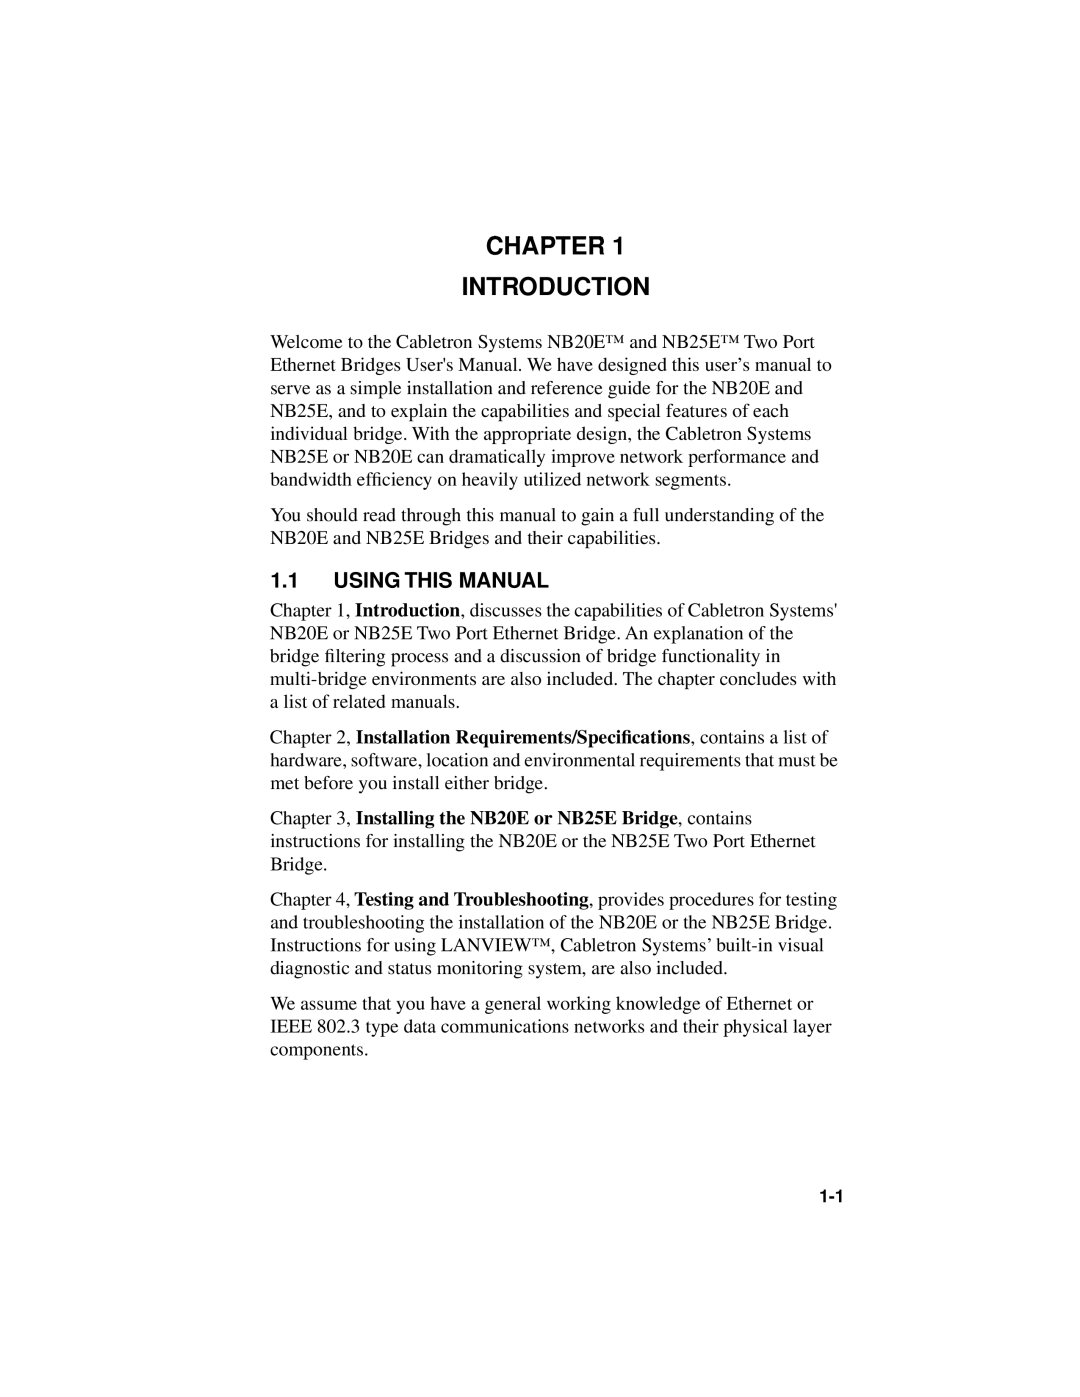 Cabletron Systems NB25 E, NB20E user manual Chapter Introduction, Using This Manual 